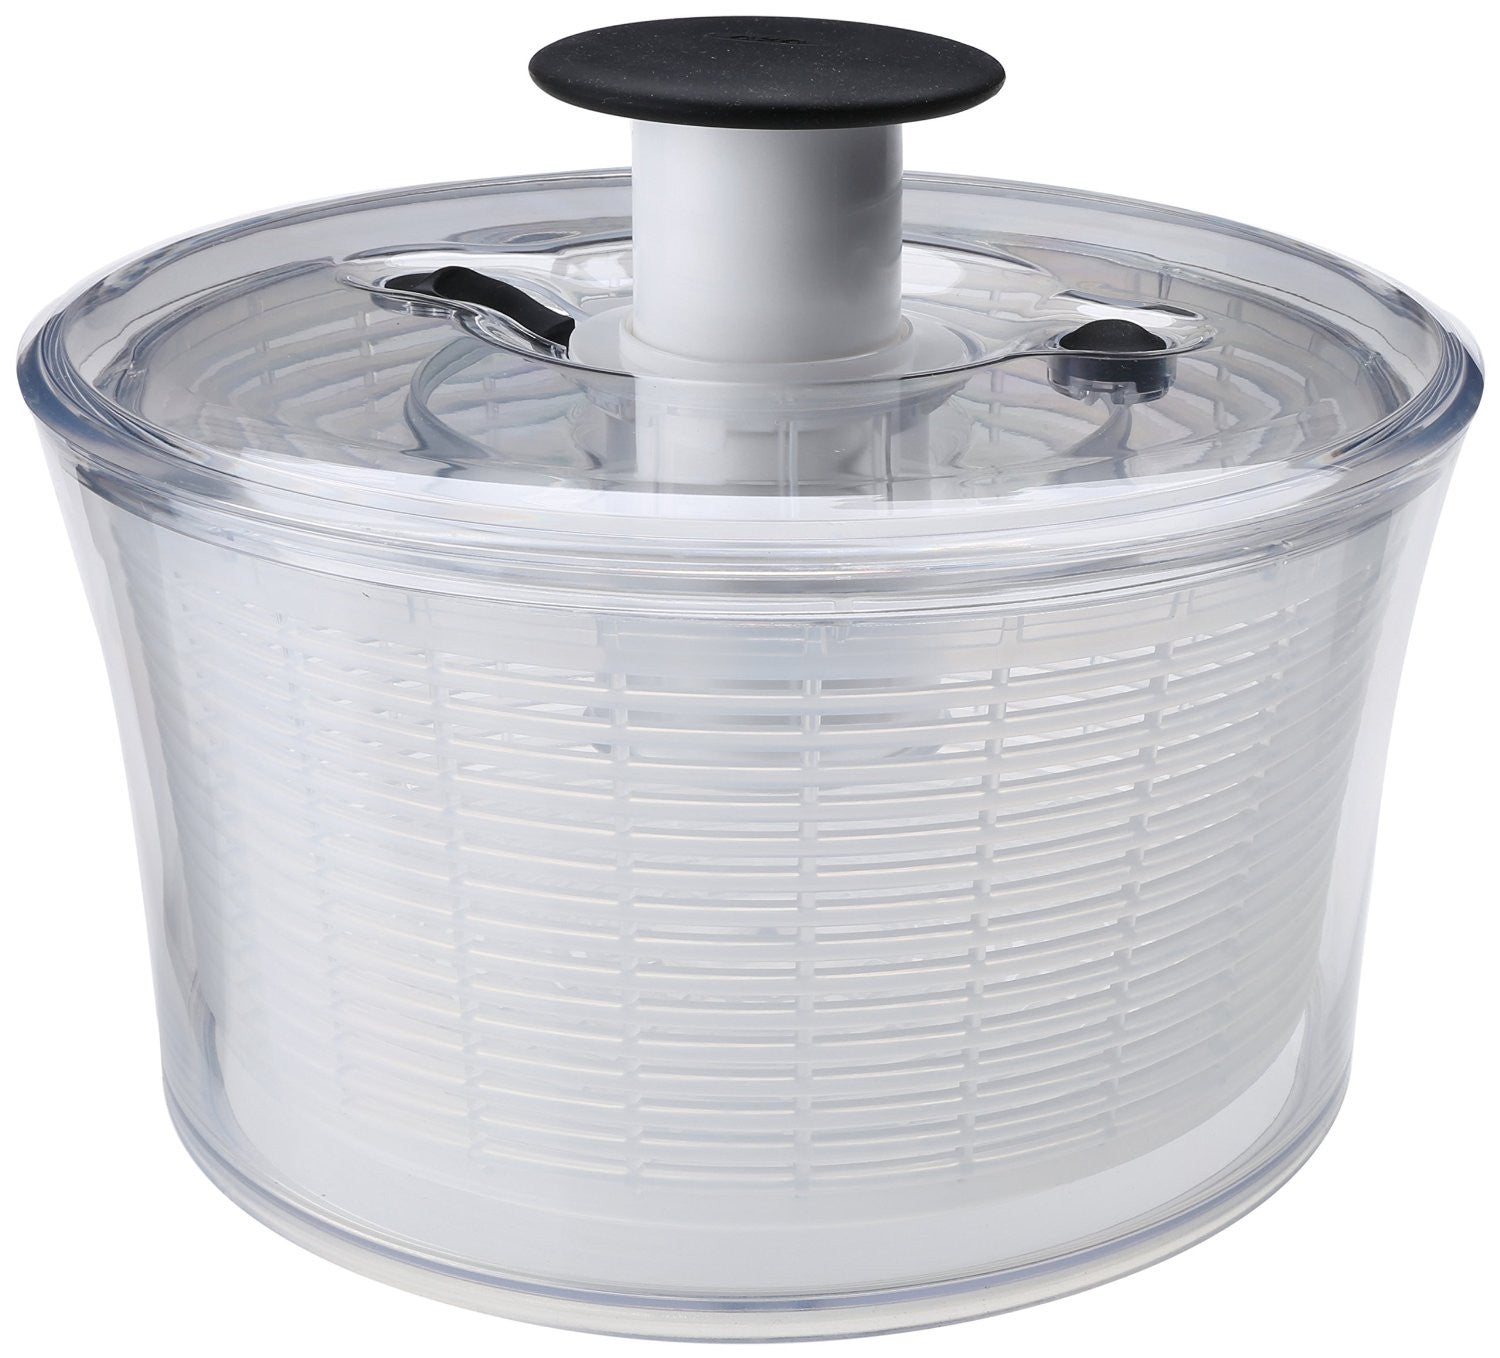 OXO Stainless-Steel Salad Spinner  Salad spinner, Salad spinners, Cooking